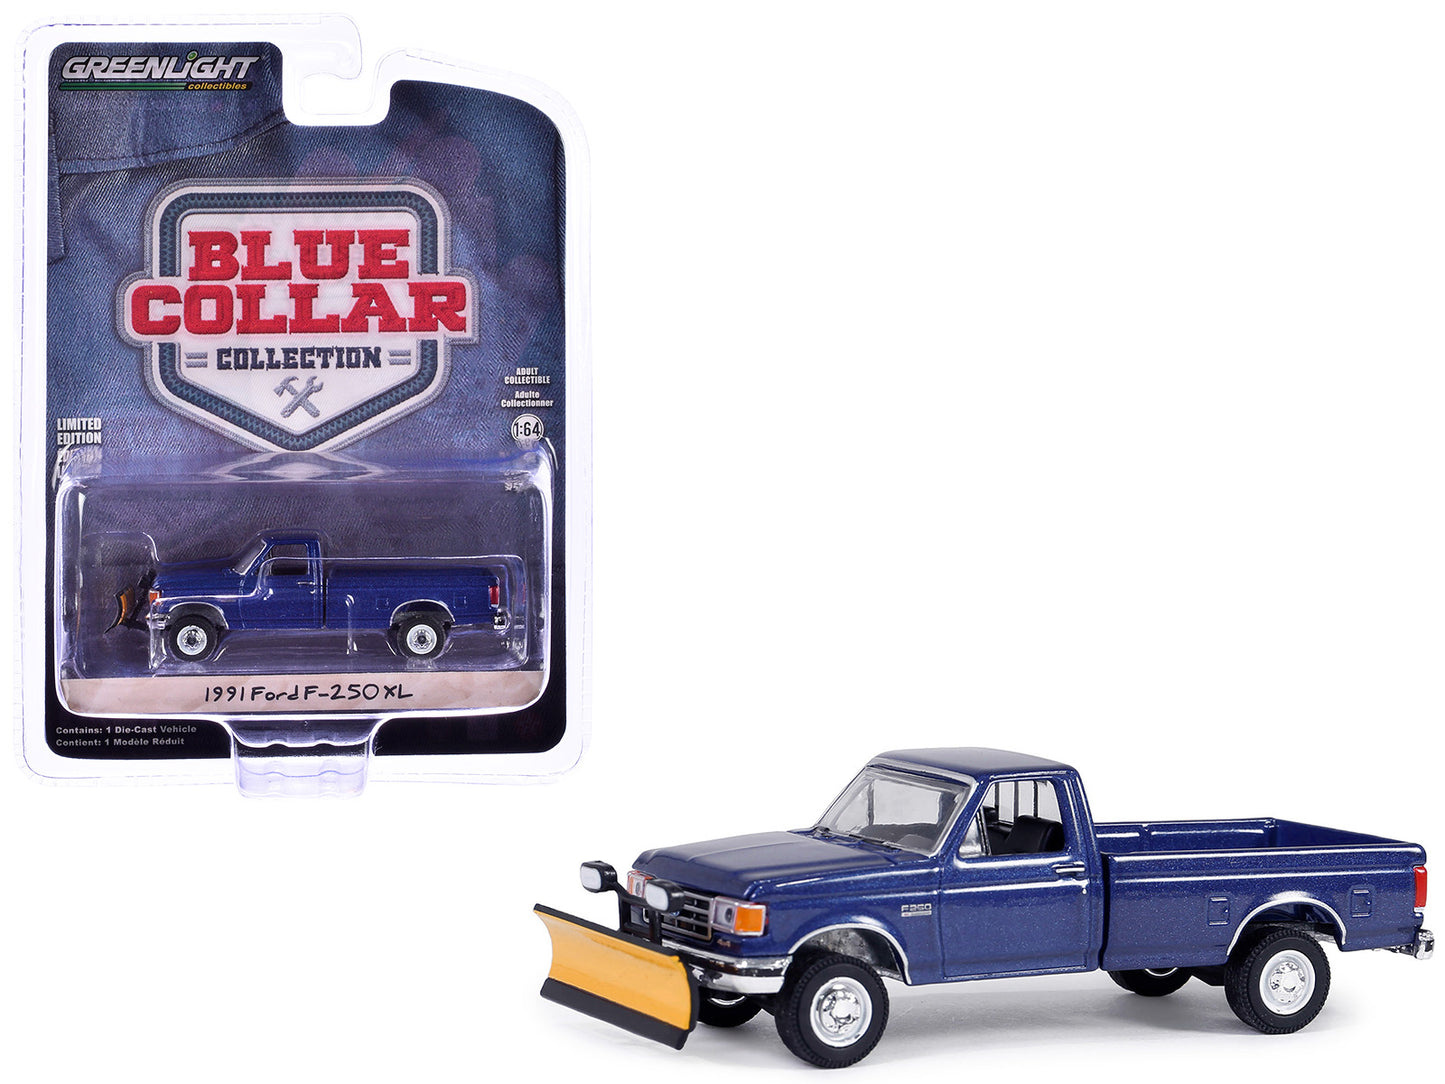 Brand new 1/64 scale diecast car model of 1991 Ford F-250 XL 4X4 Pickup Truck with Snow Plow Deep Shadow Blue Metallic "